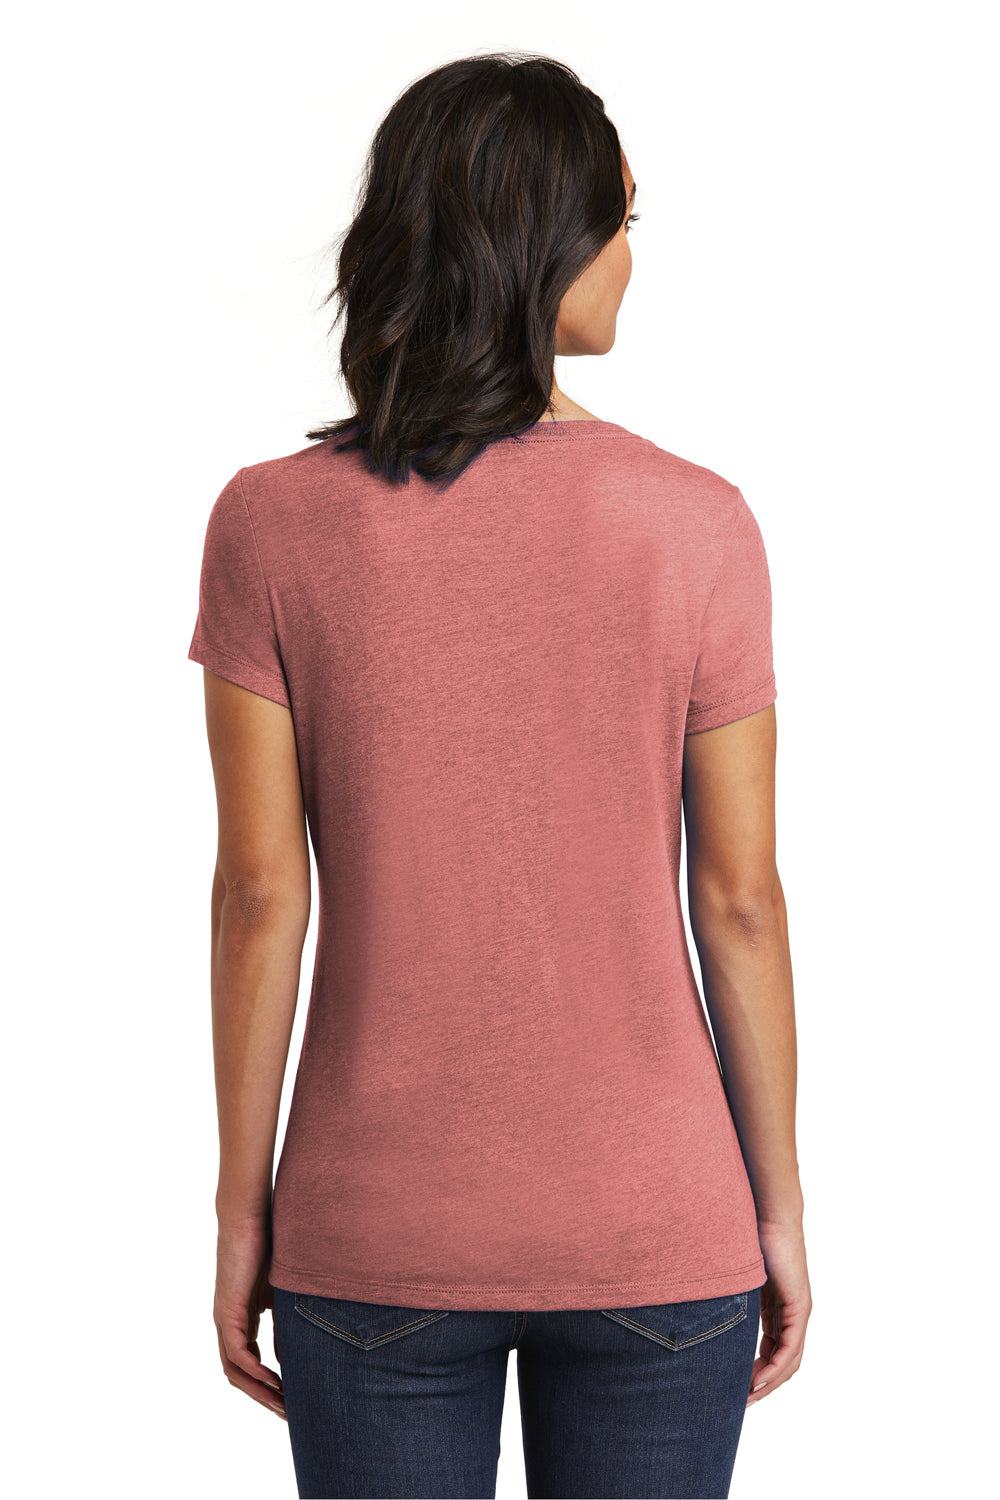 District DT6503 Womens Very Important Short Sleeve V-Neck T-Shirt Heather Blush Pink Back